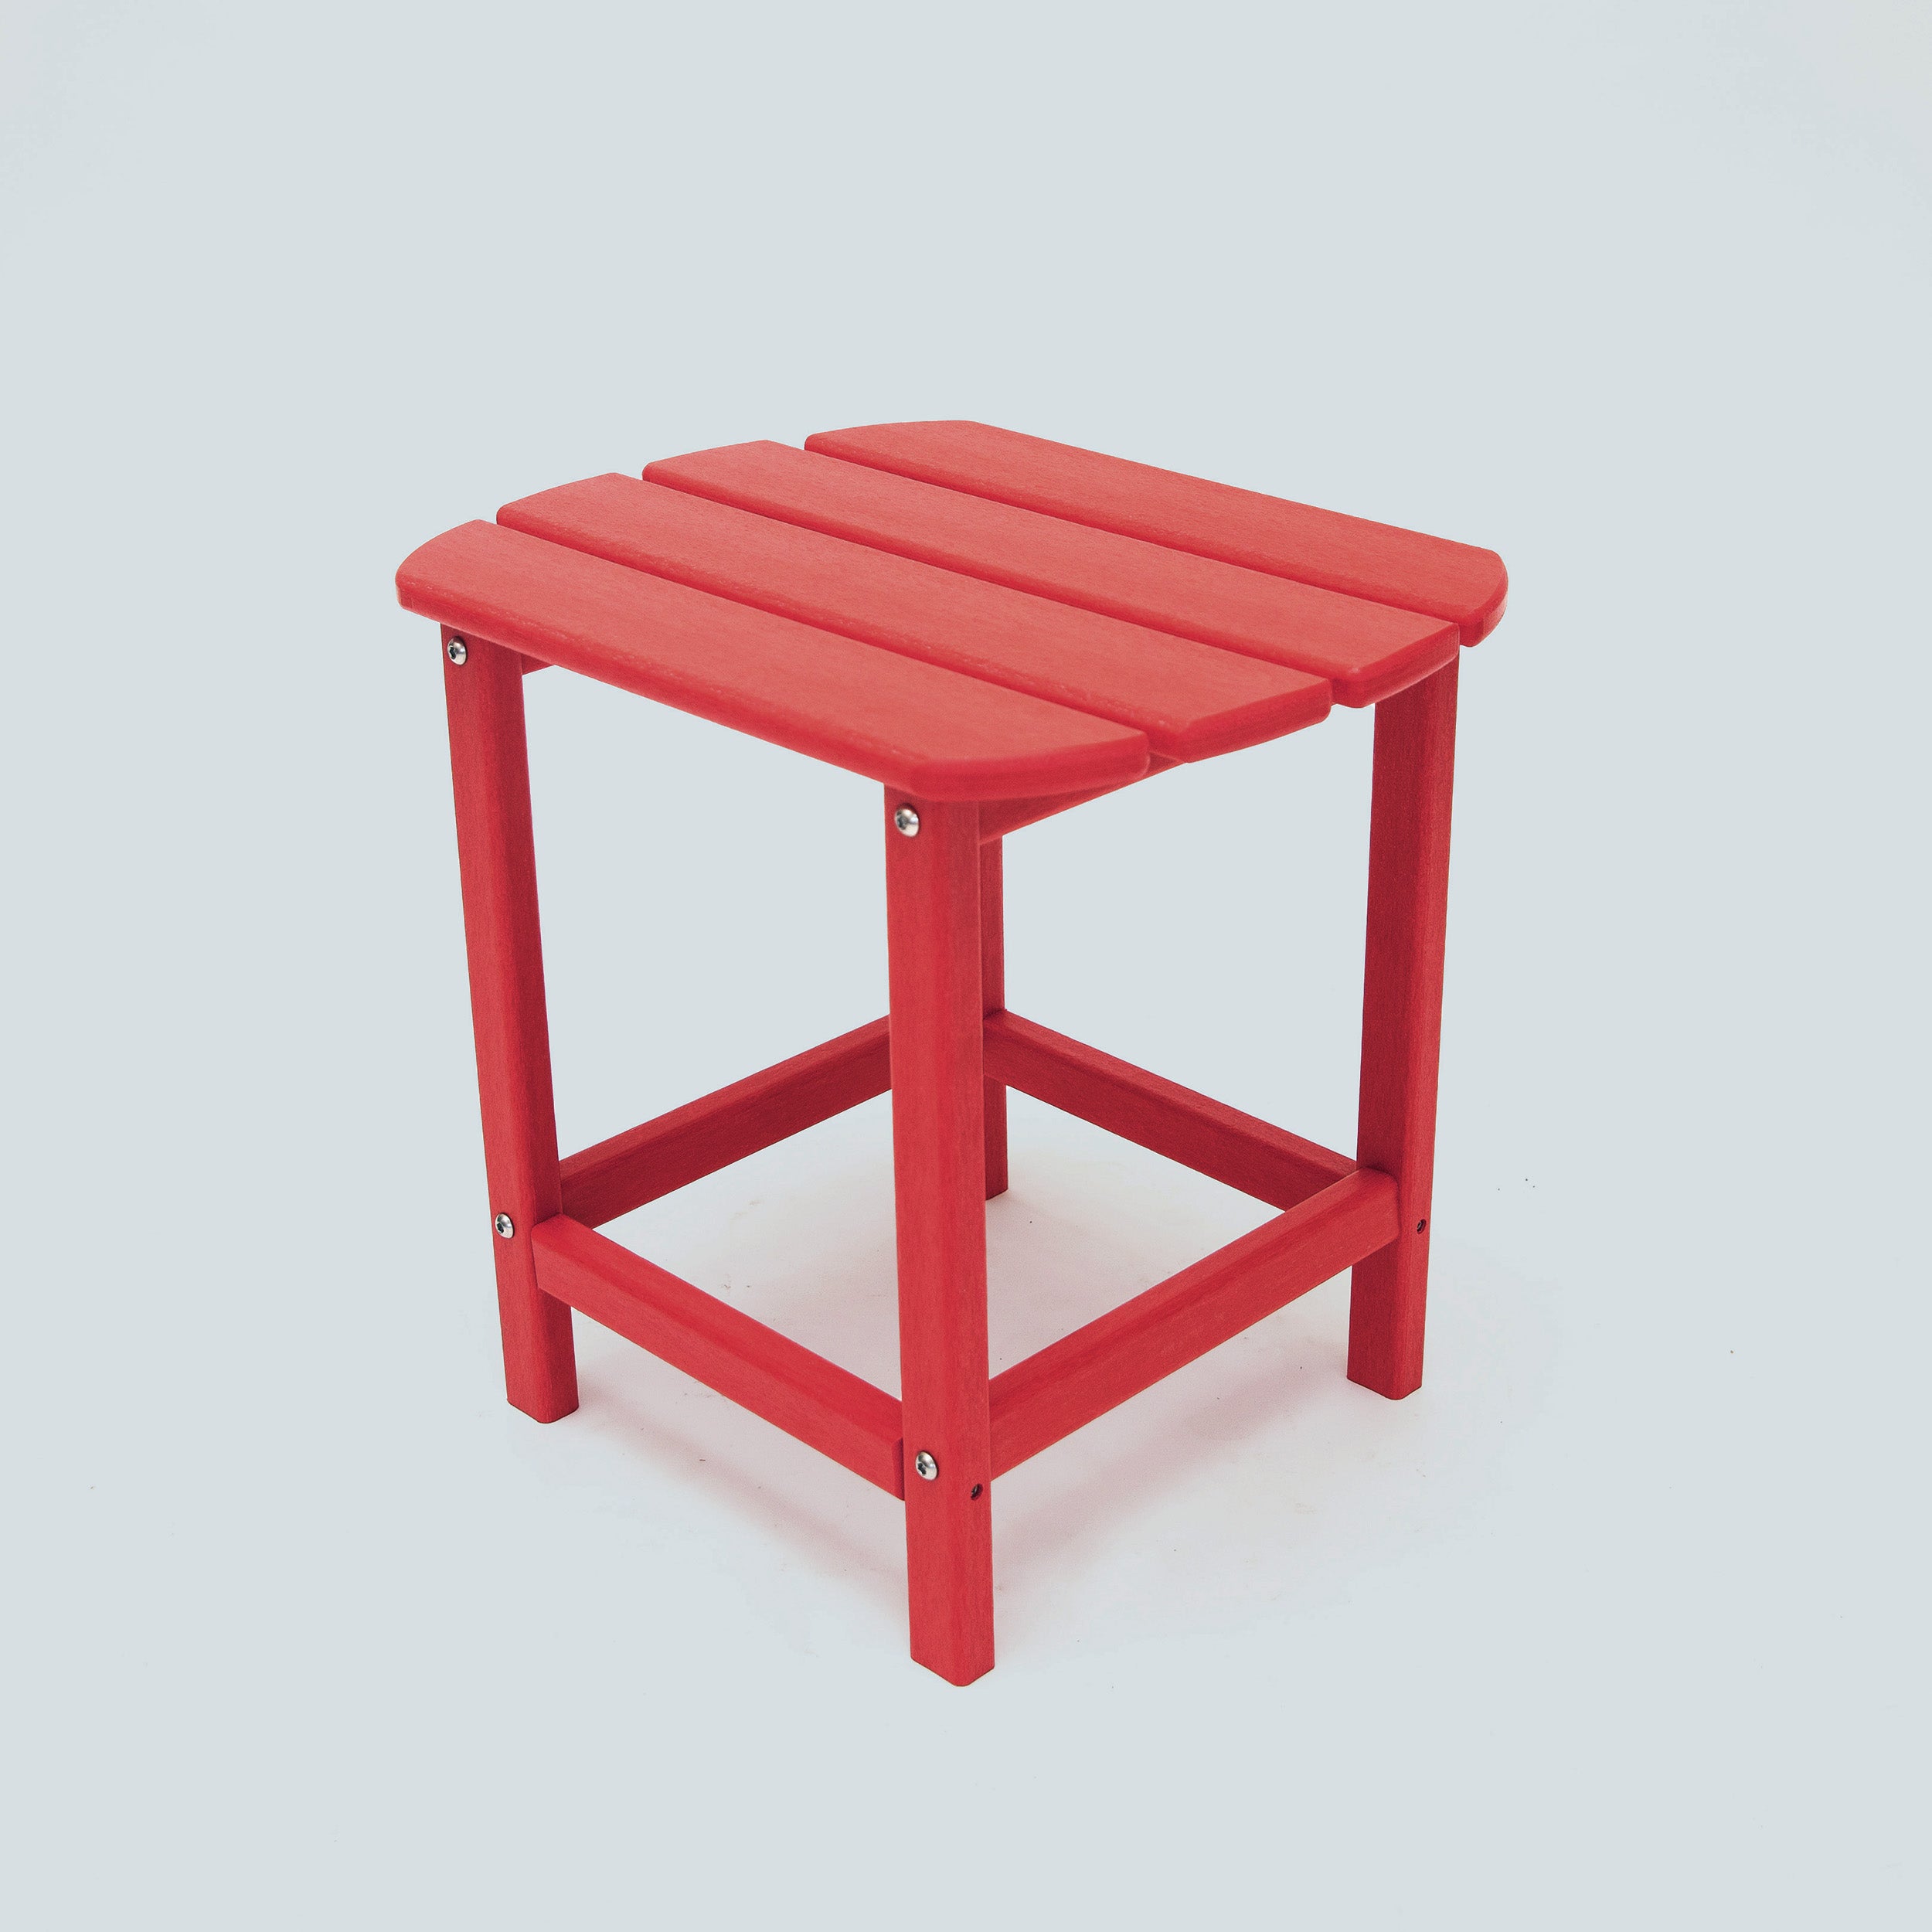 Corona 18" HDPE Recycled Plastic Side Table